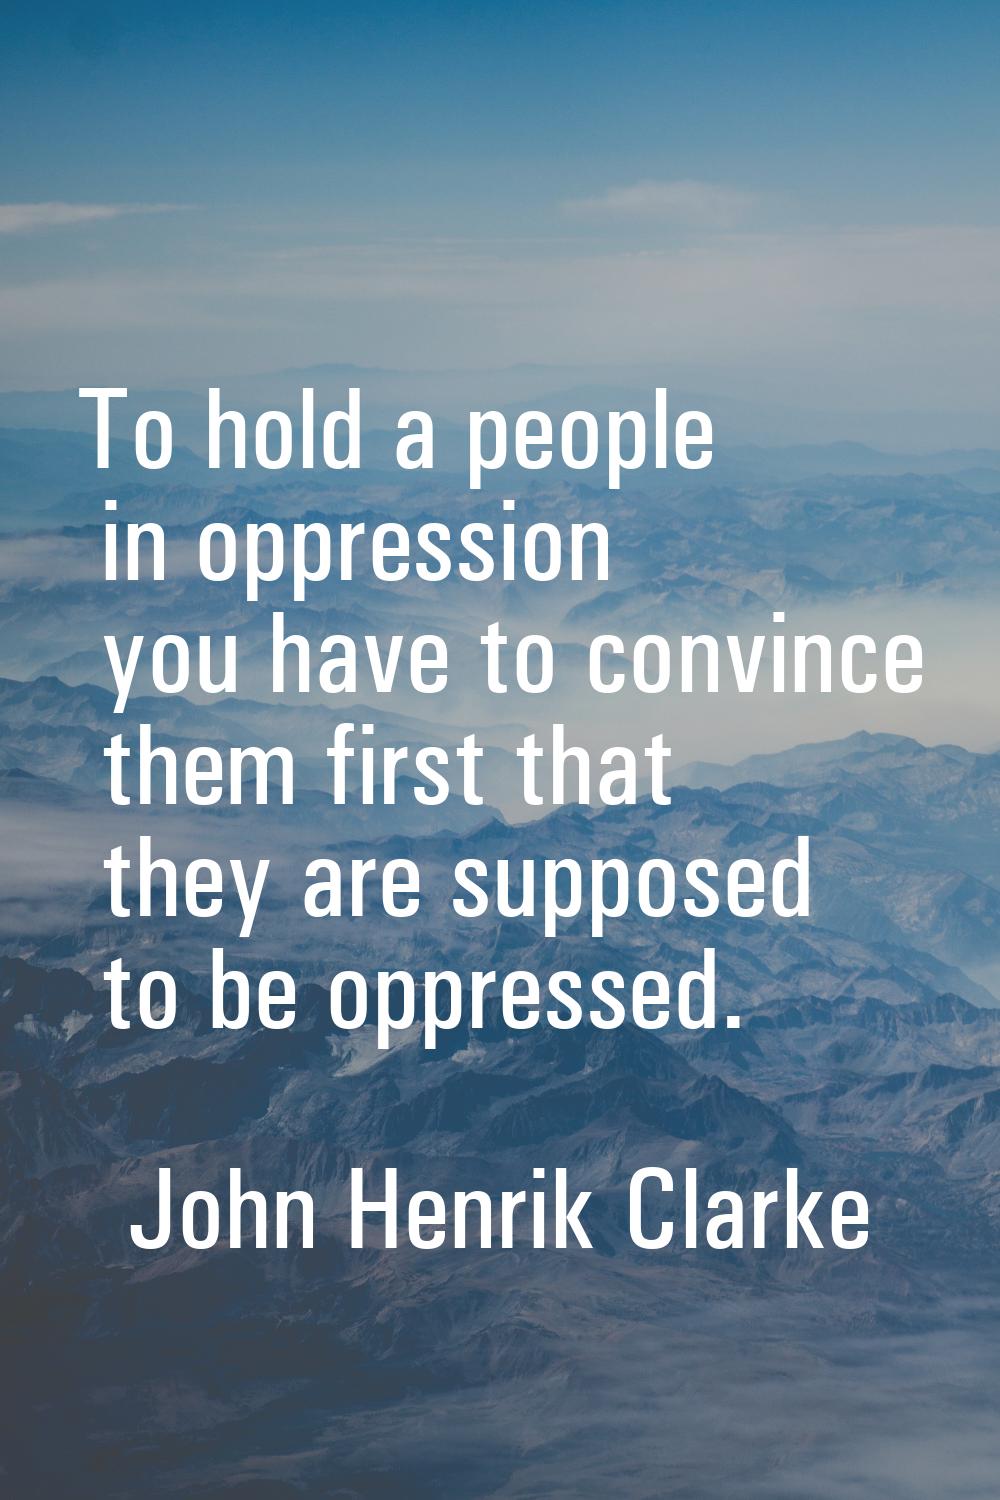 To hold a people in oppression you have to convince them first that they are supposed to be oppress